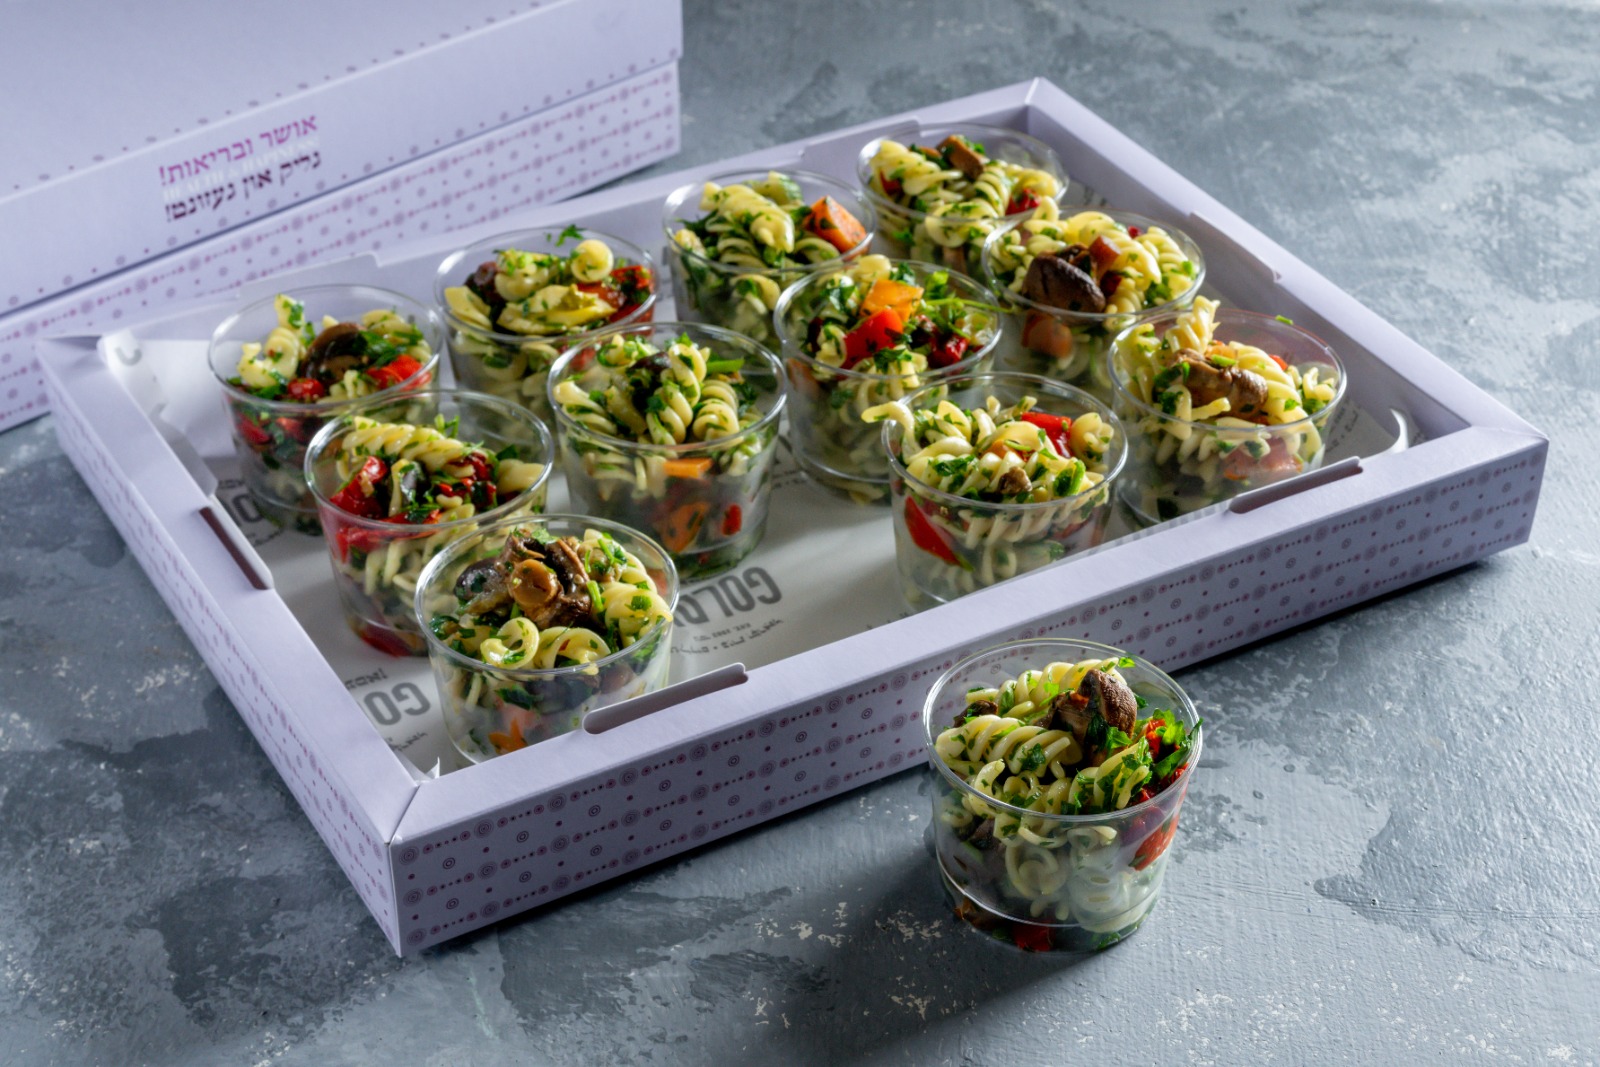 A tray of pasta salad cups